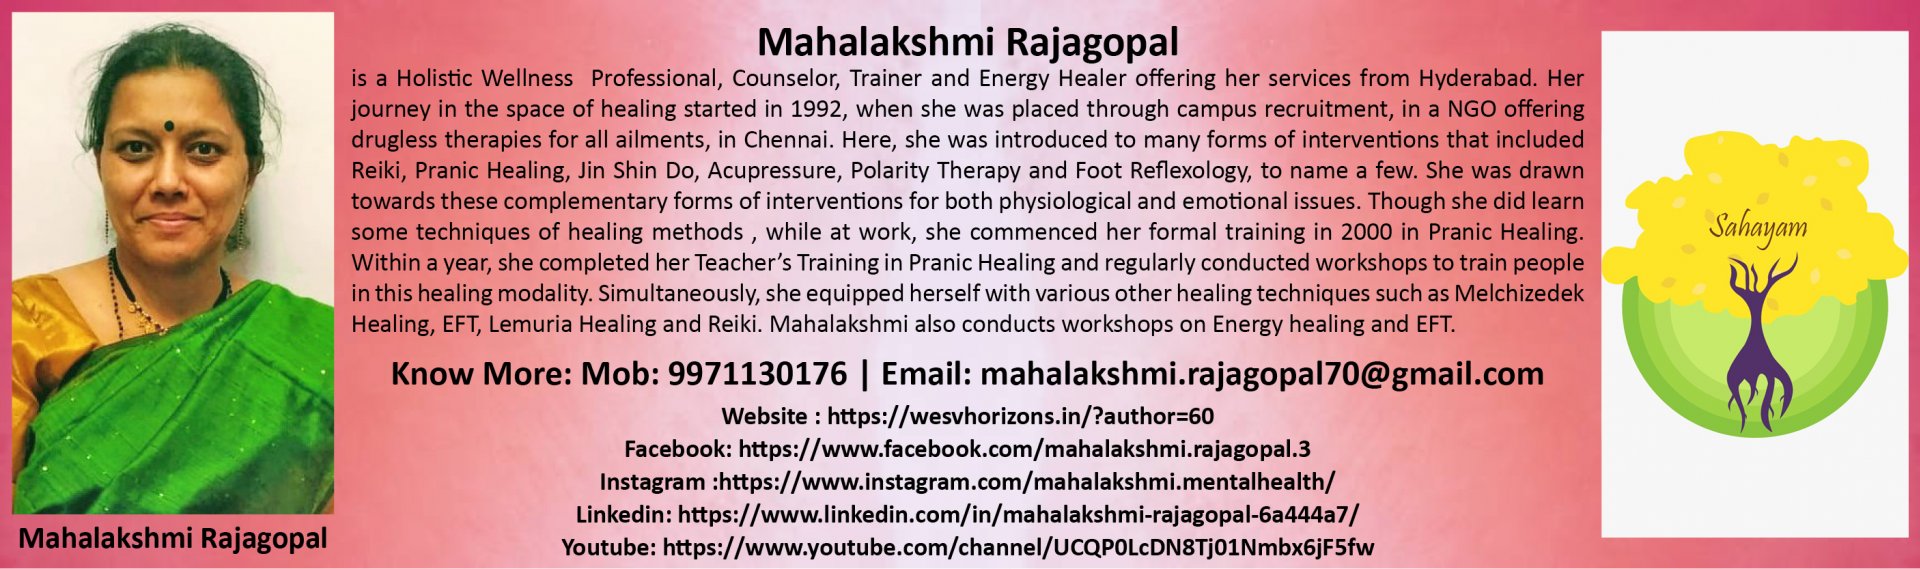 Mahalakshmi Rajagopal is a Holistic Wellness  Professional, Counselor, Trainer and Energy Healer offering her services from Hyderabad